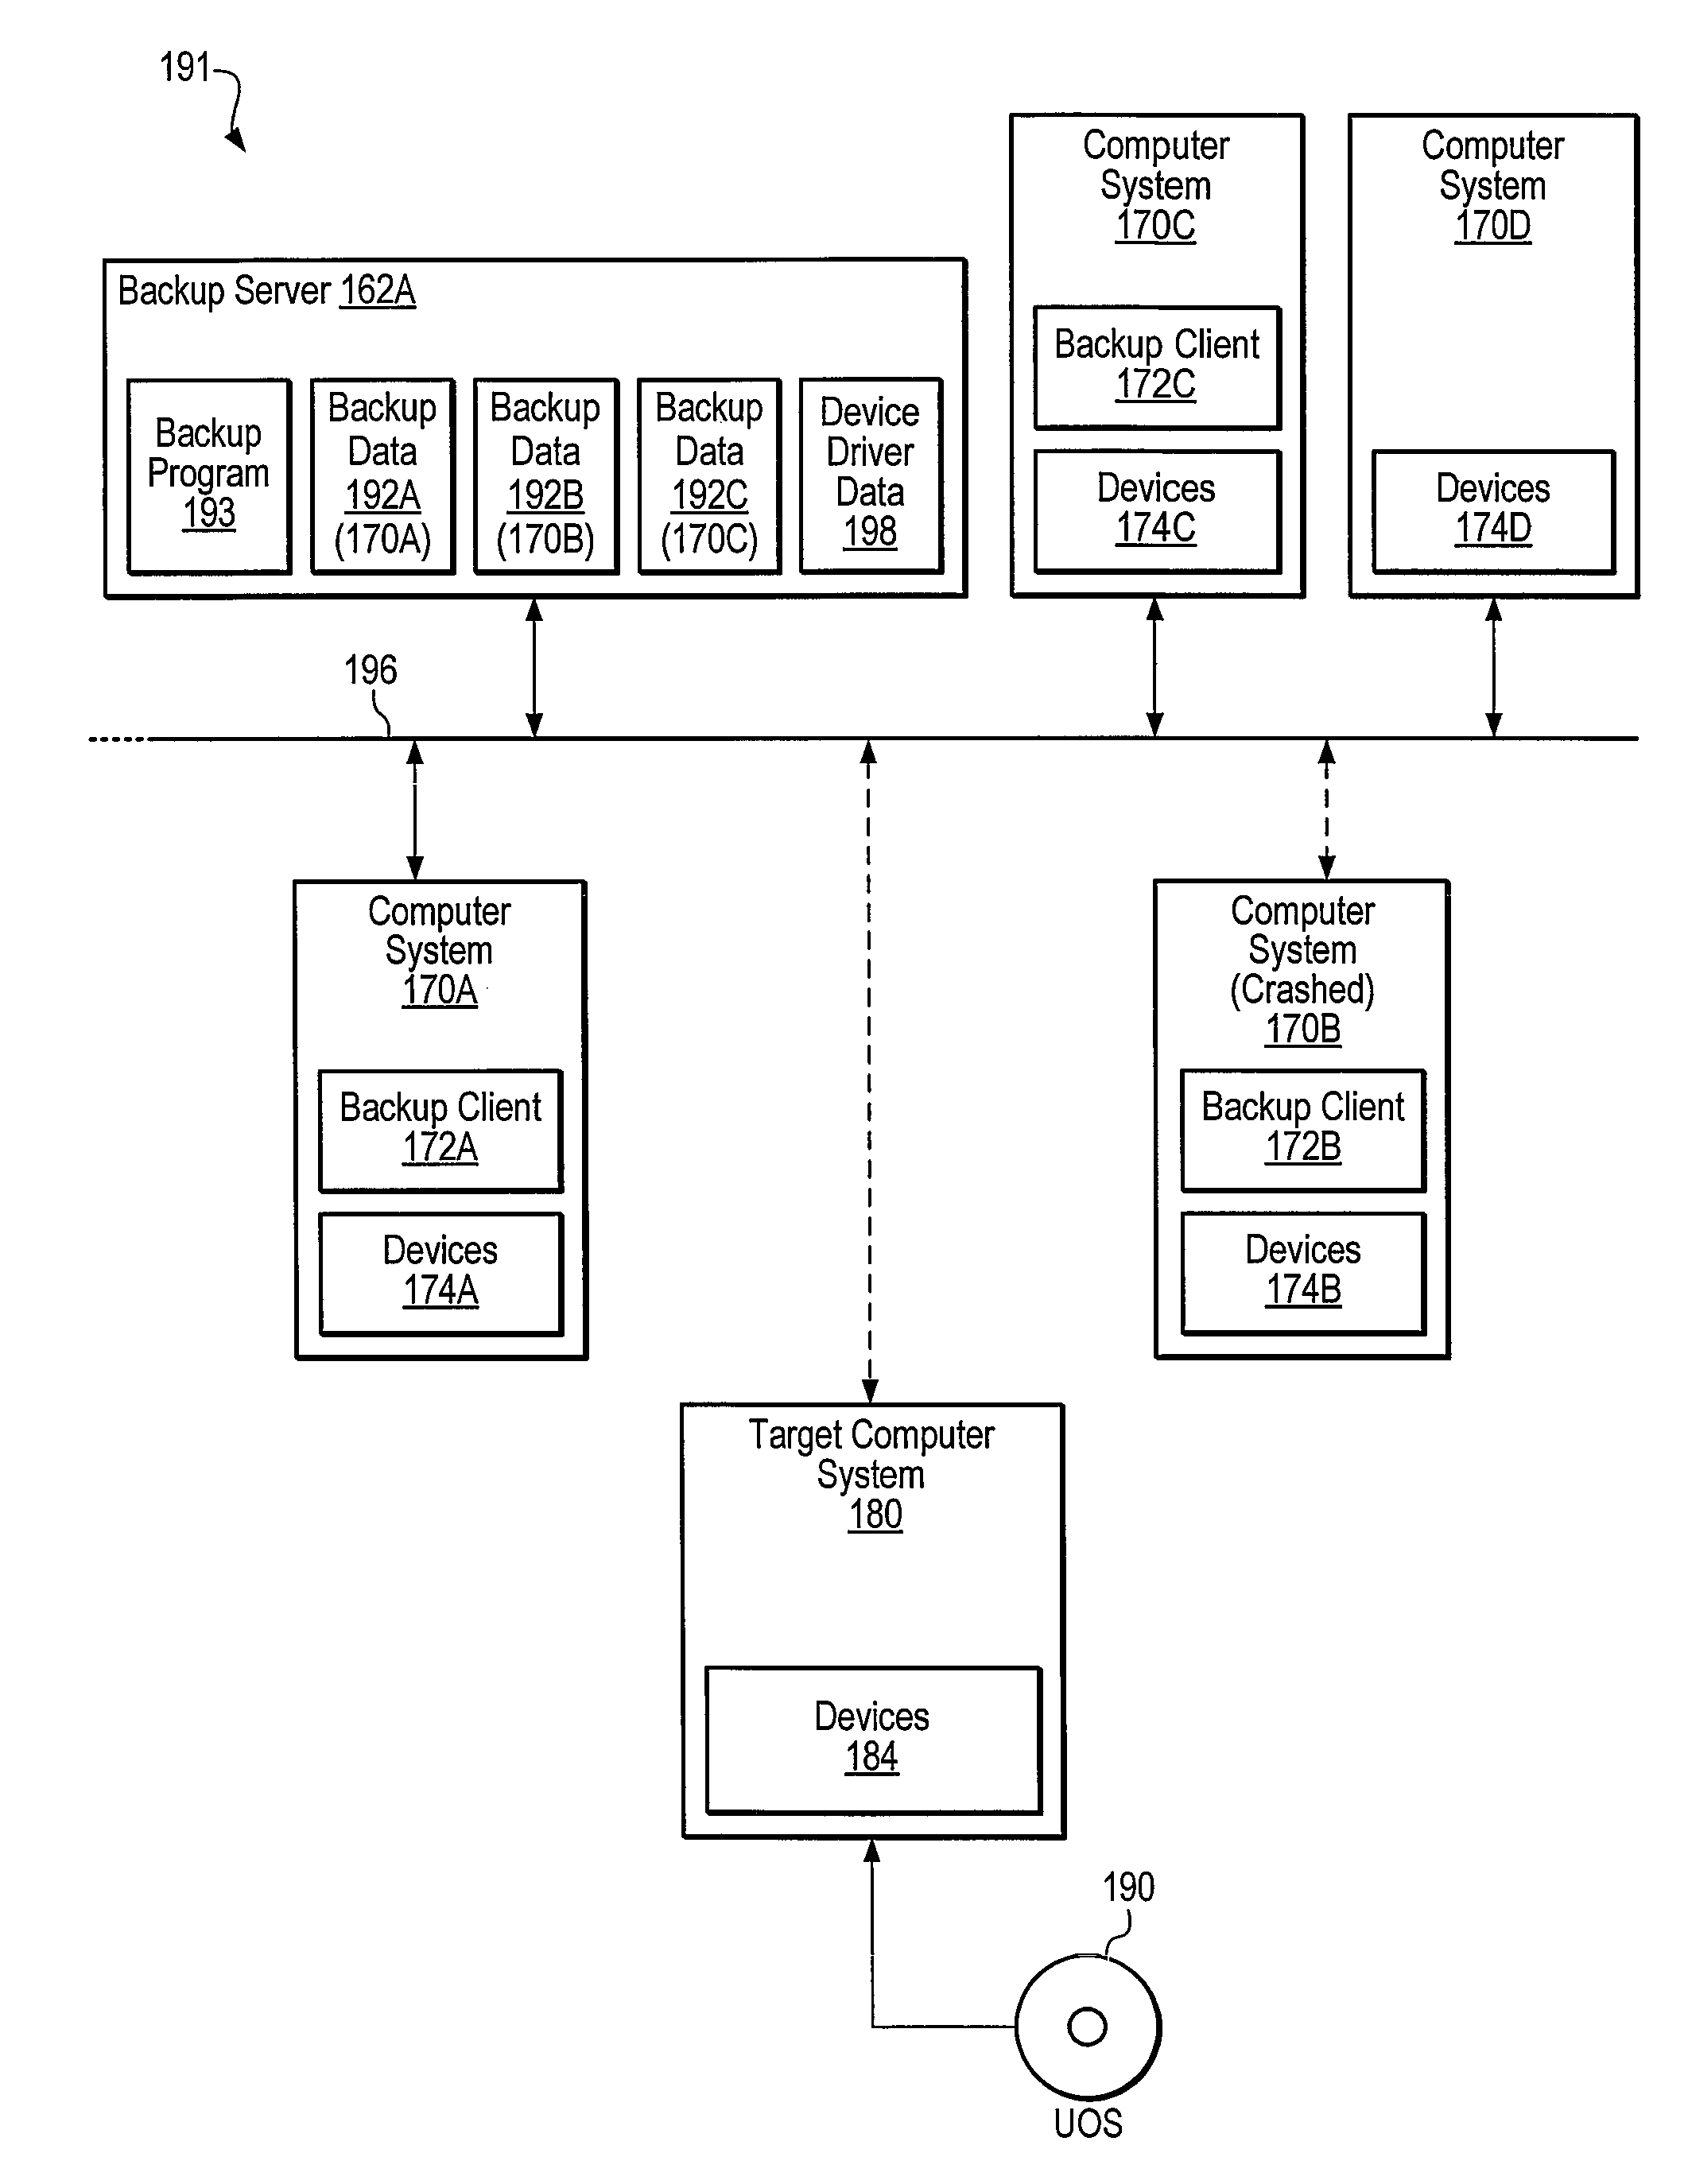 Creation of a device database and synthesis of device driver information during dissimilar system restore